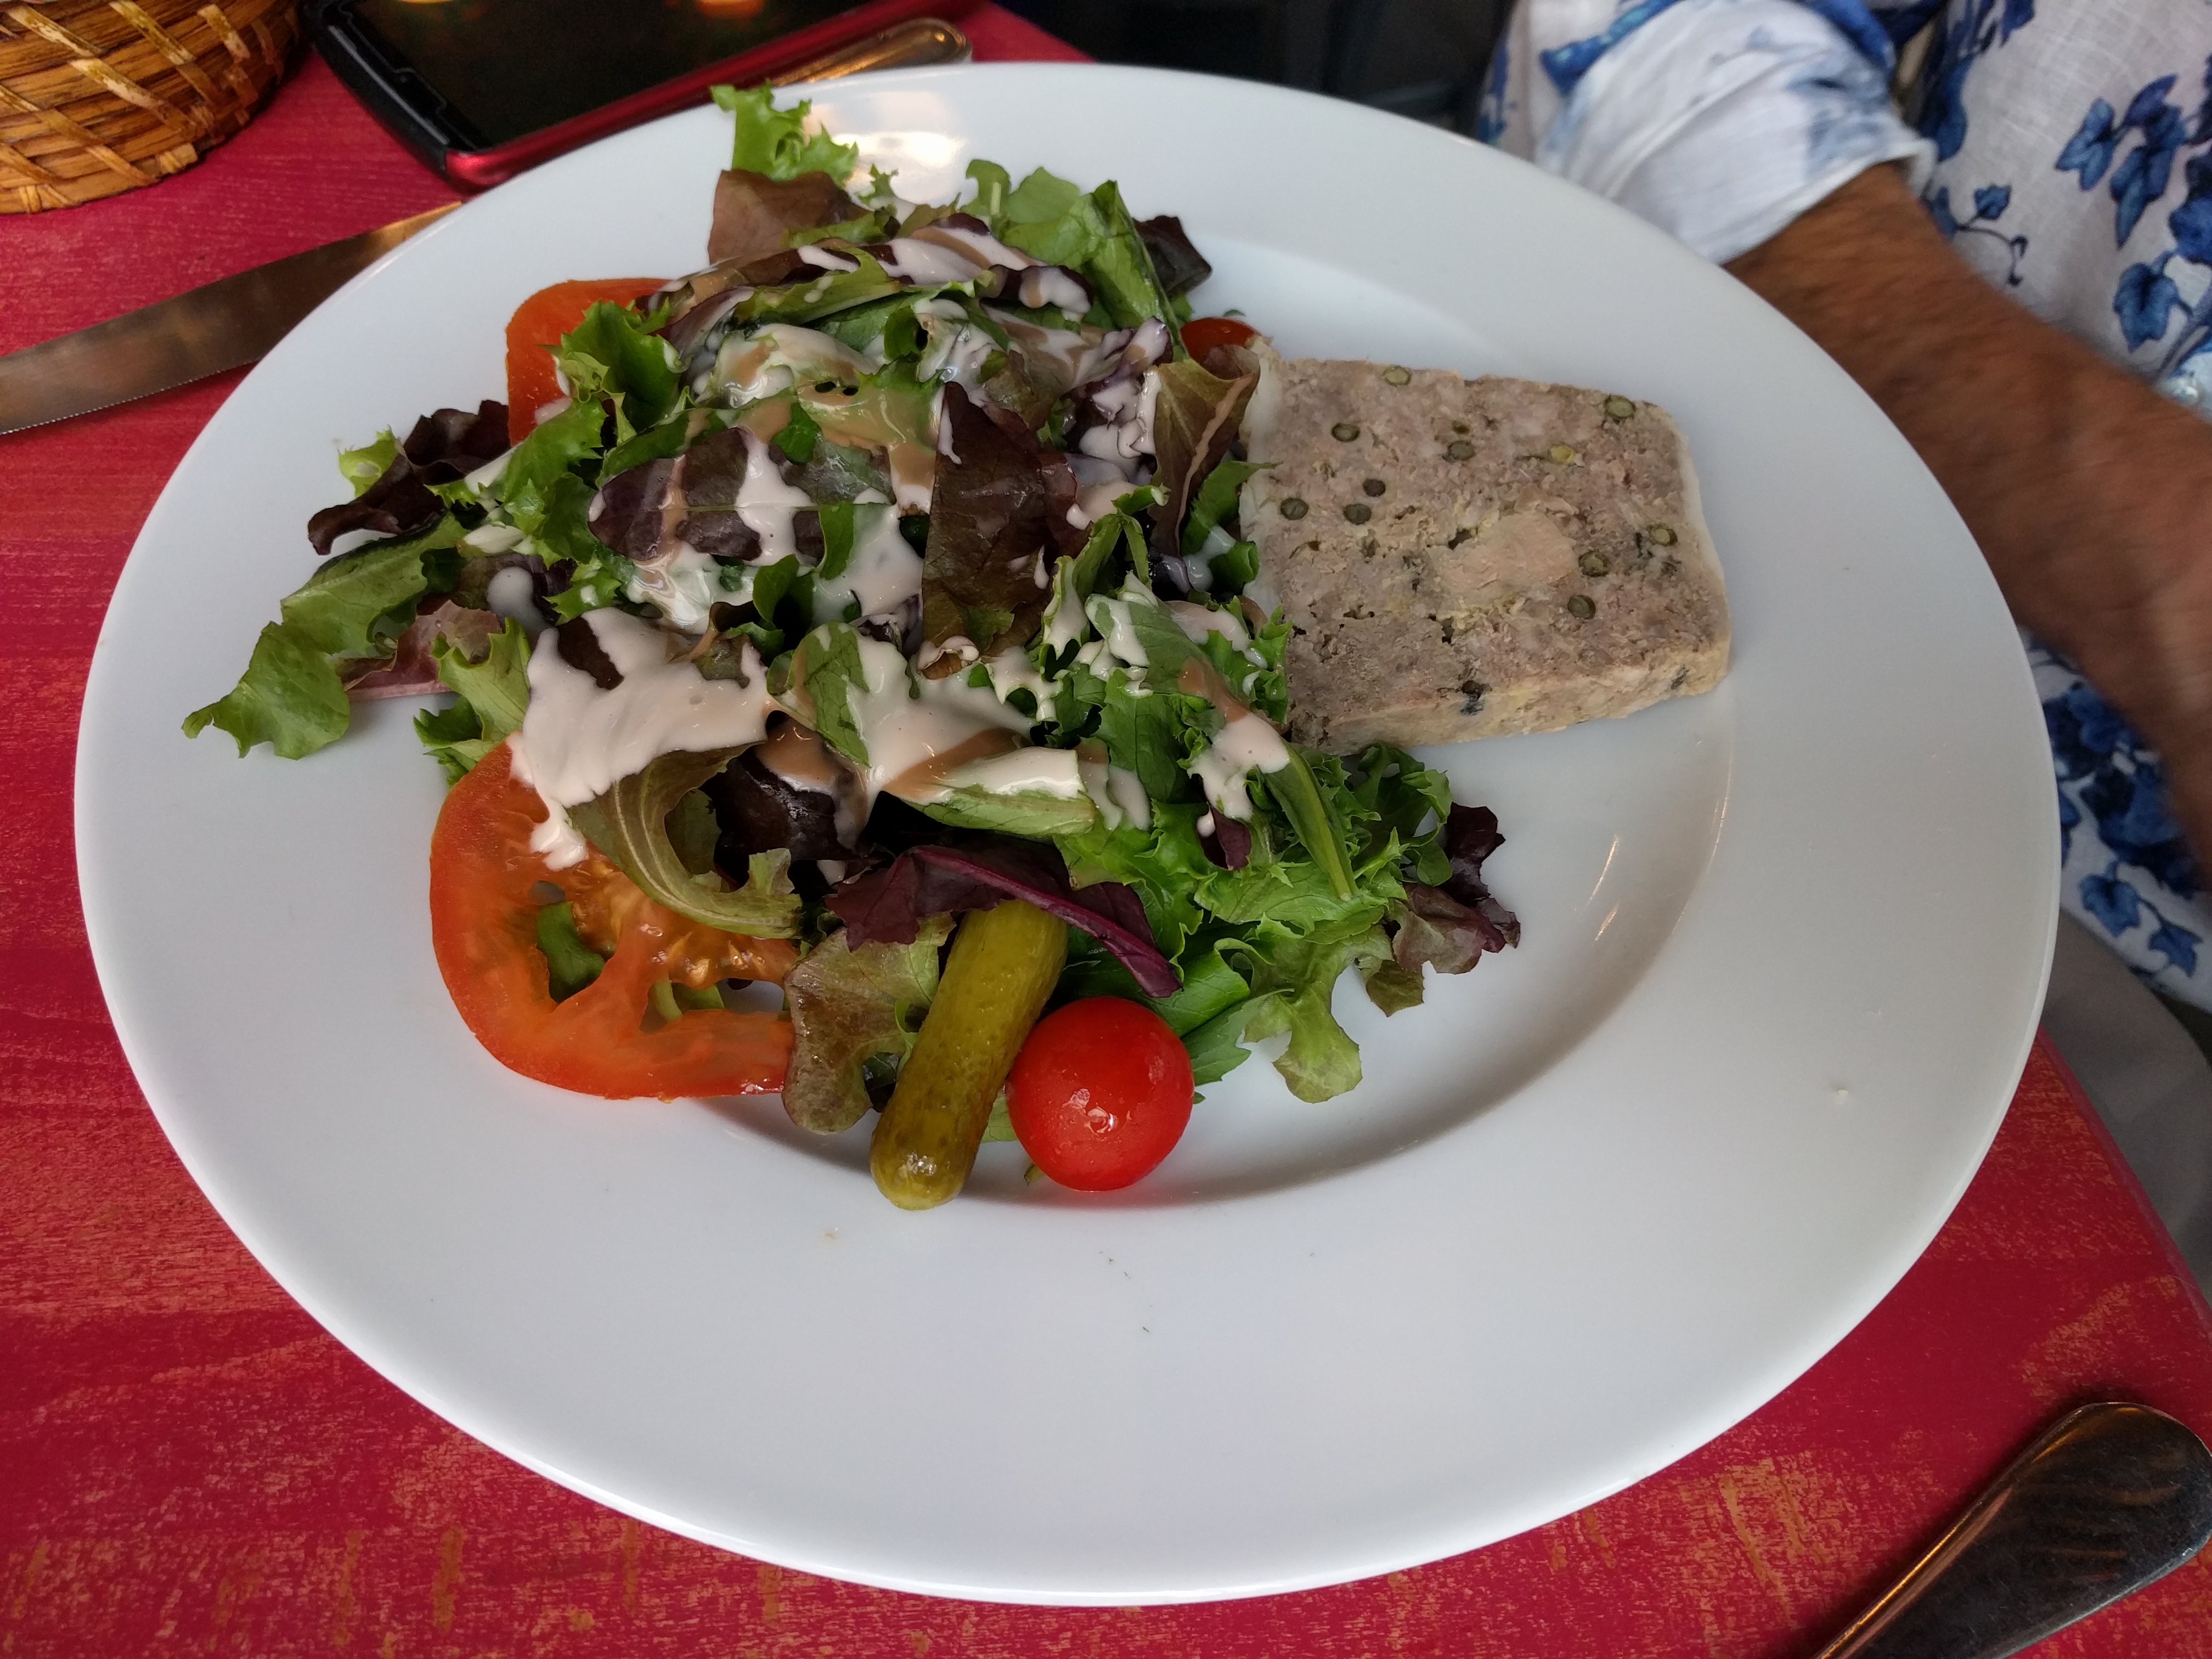 Salad starter which is called an entree on French menus